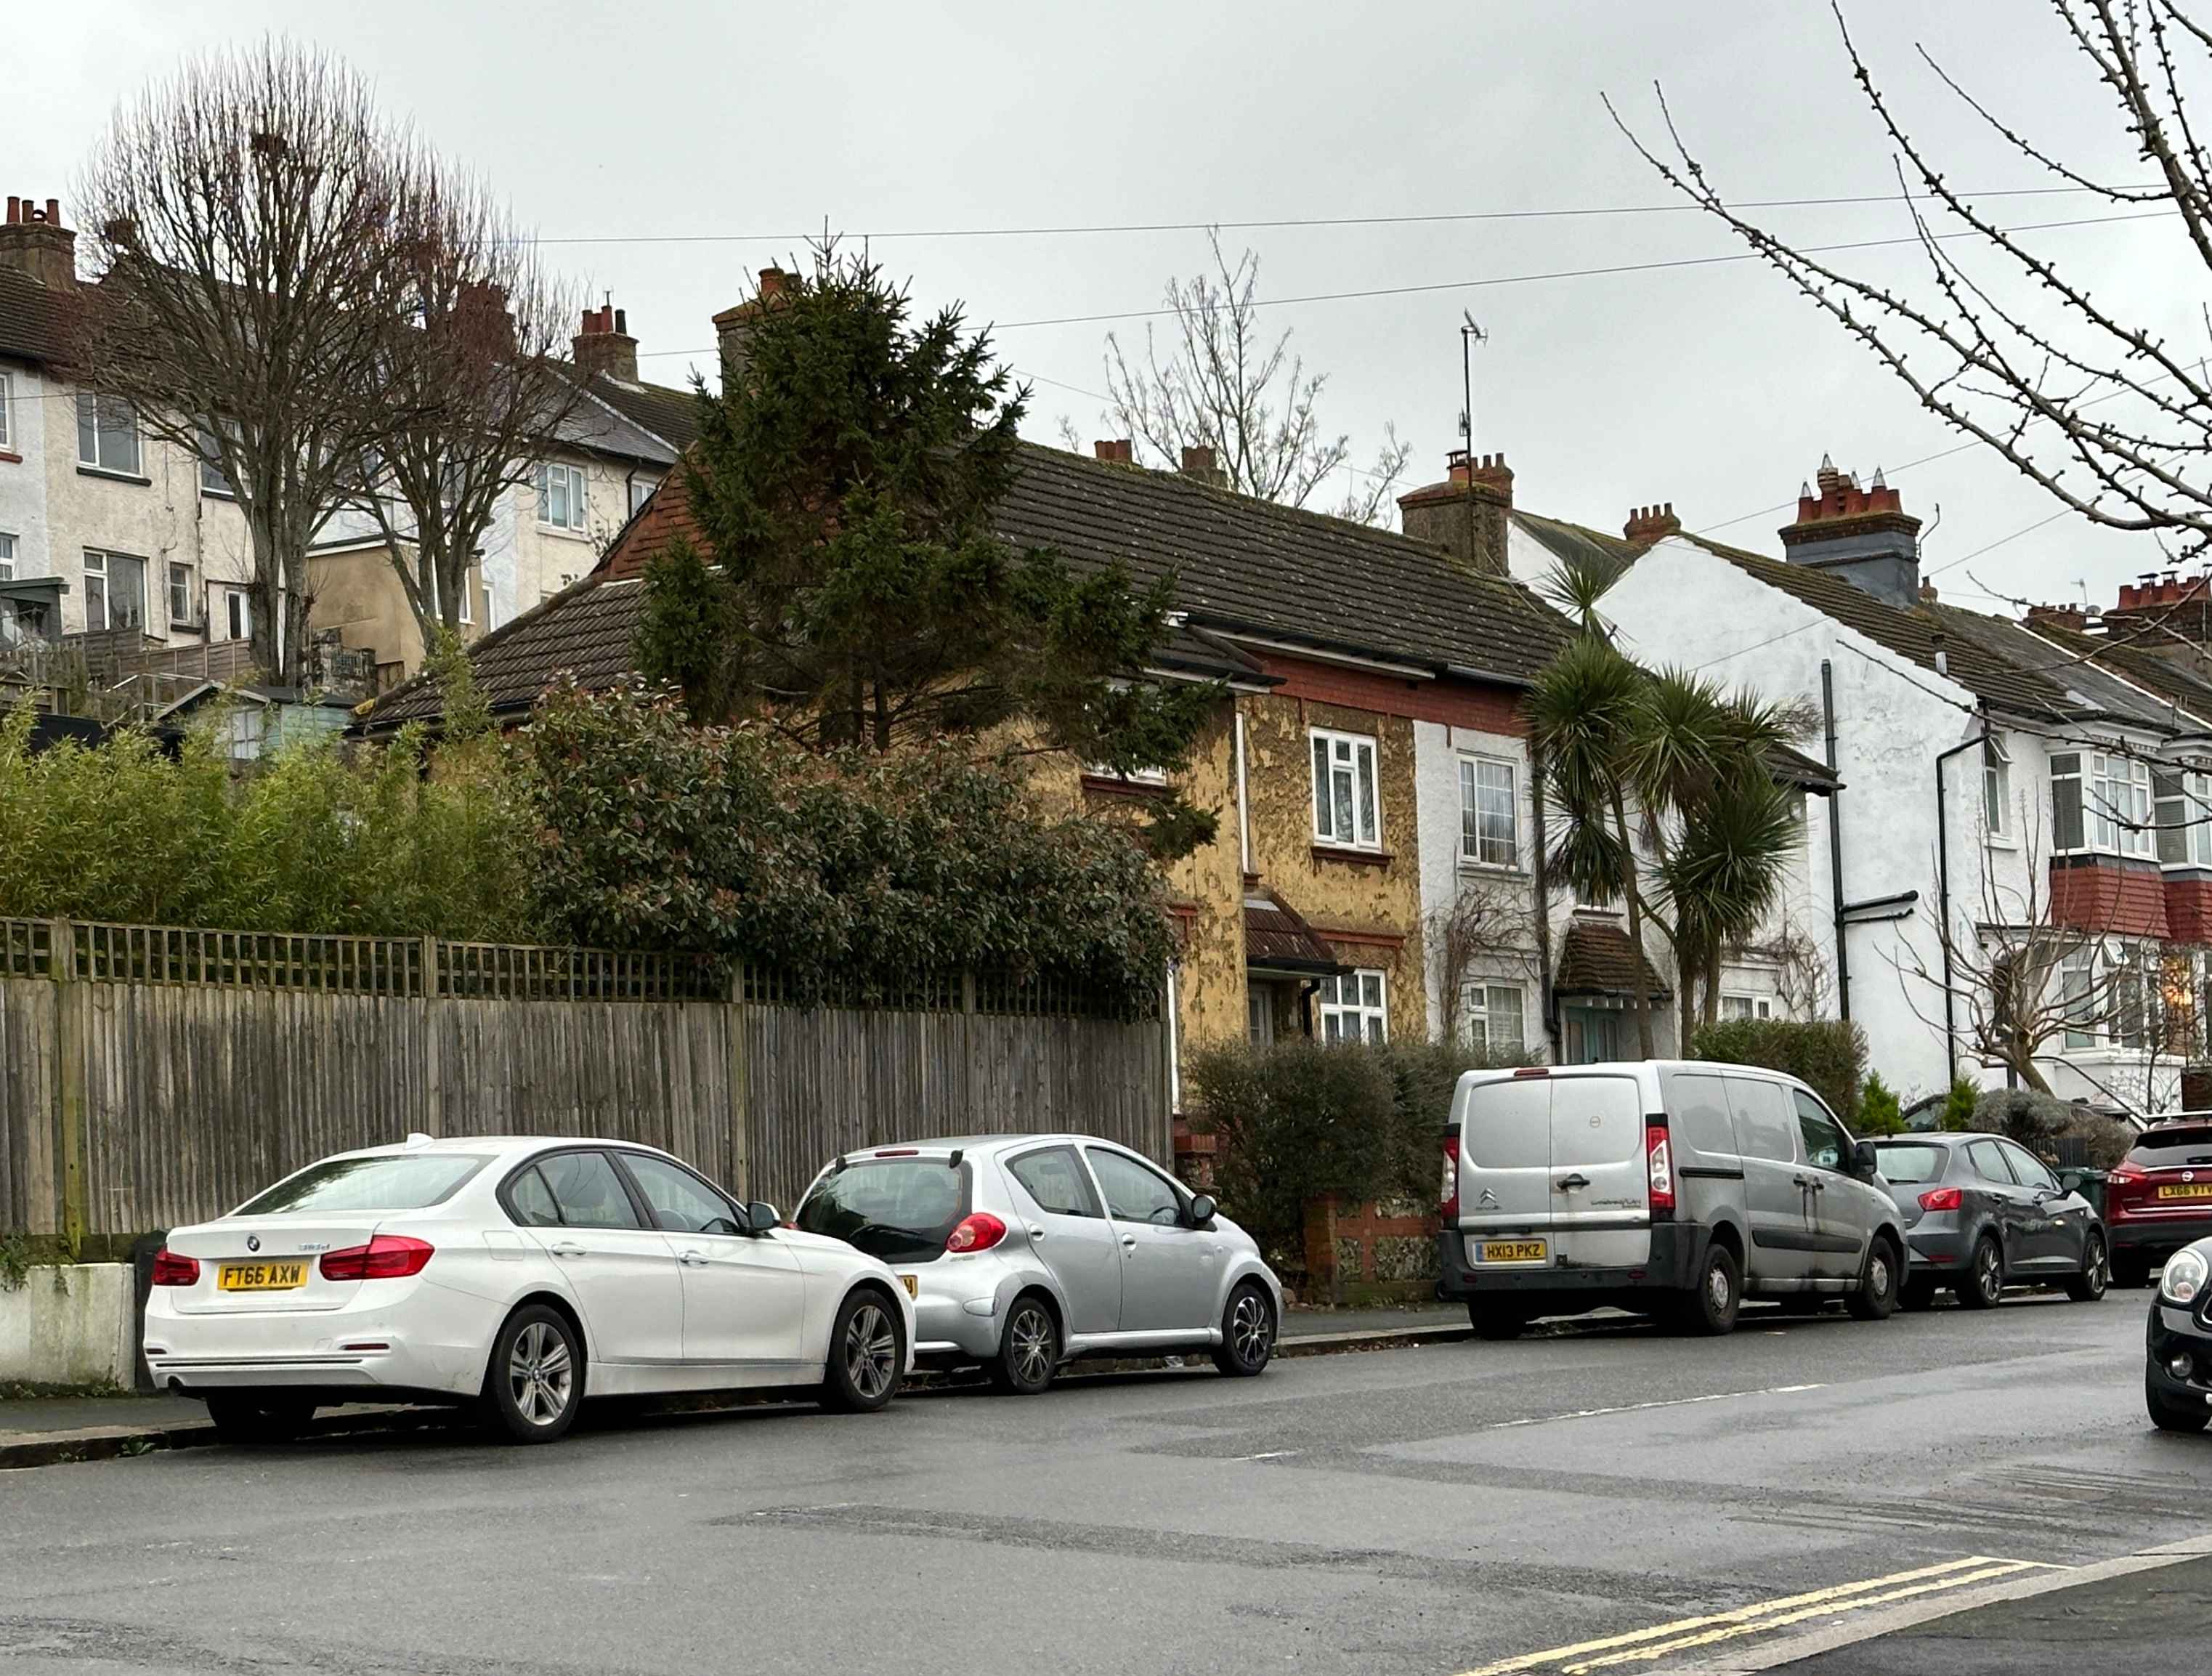 Photograph of FT66 AXW - a White BMW 3 Series parked in Hollingdean by a non-resident who uses the local area as part of their Brighton commute. The seventh of seven photographs supplied by the residents of Hollingdean.